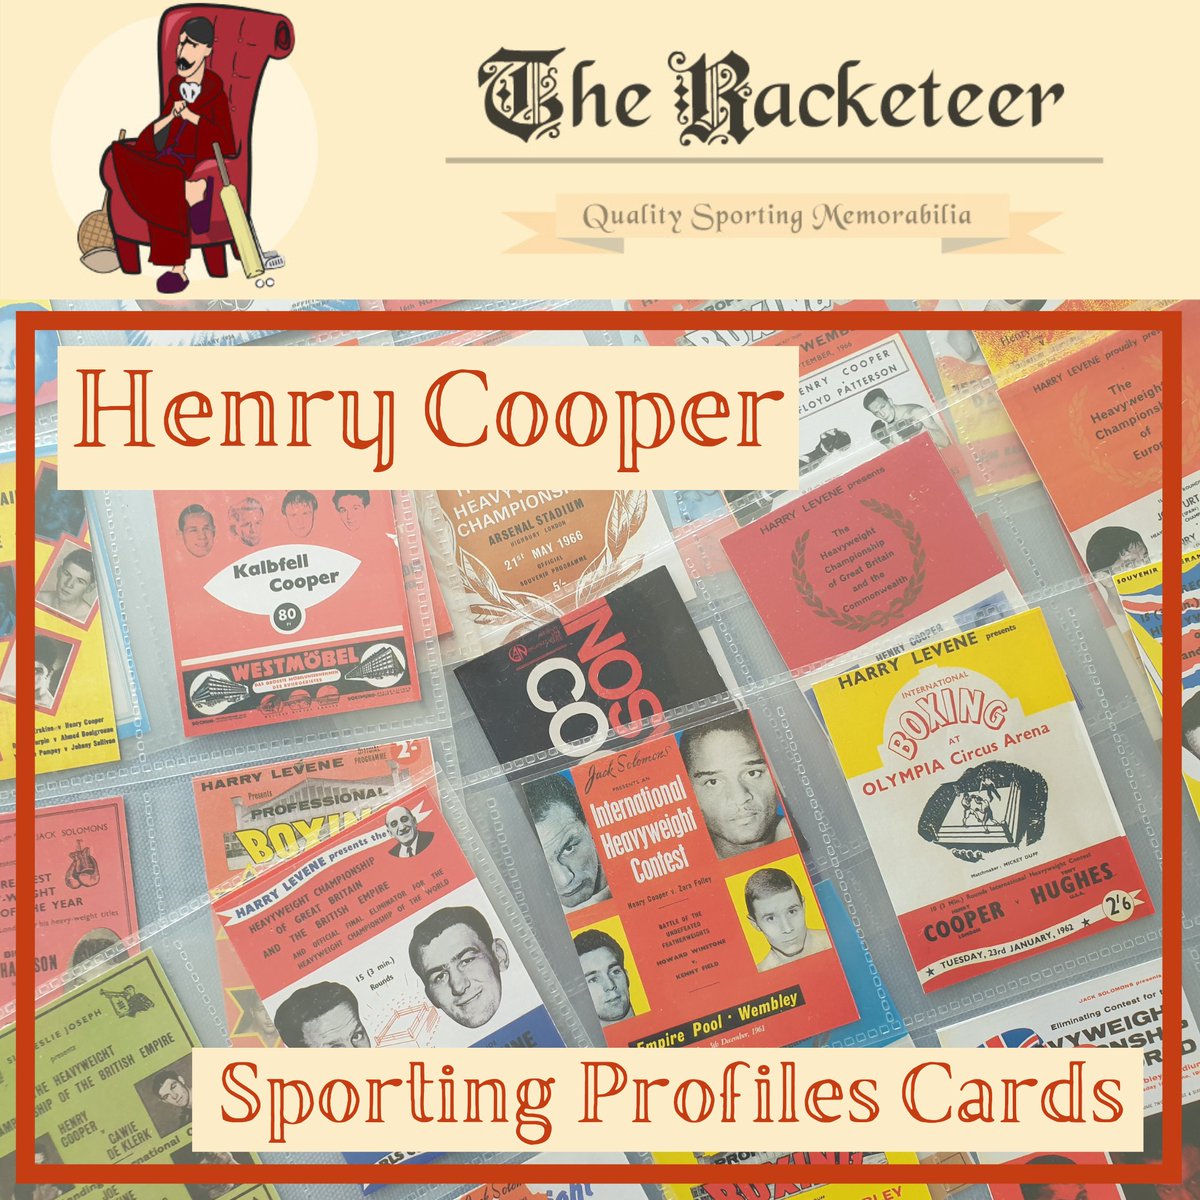 Born #OnThisDay in 1934, the #British #Boxing legend #HenryCooper

#boxingcards #sportscards #boxingmemorabilia

the-racketeer.co.uk/boxing-311-c.a…